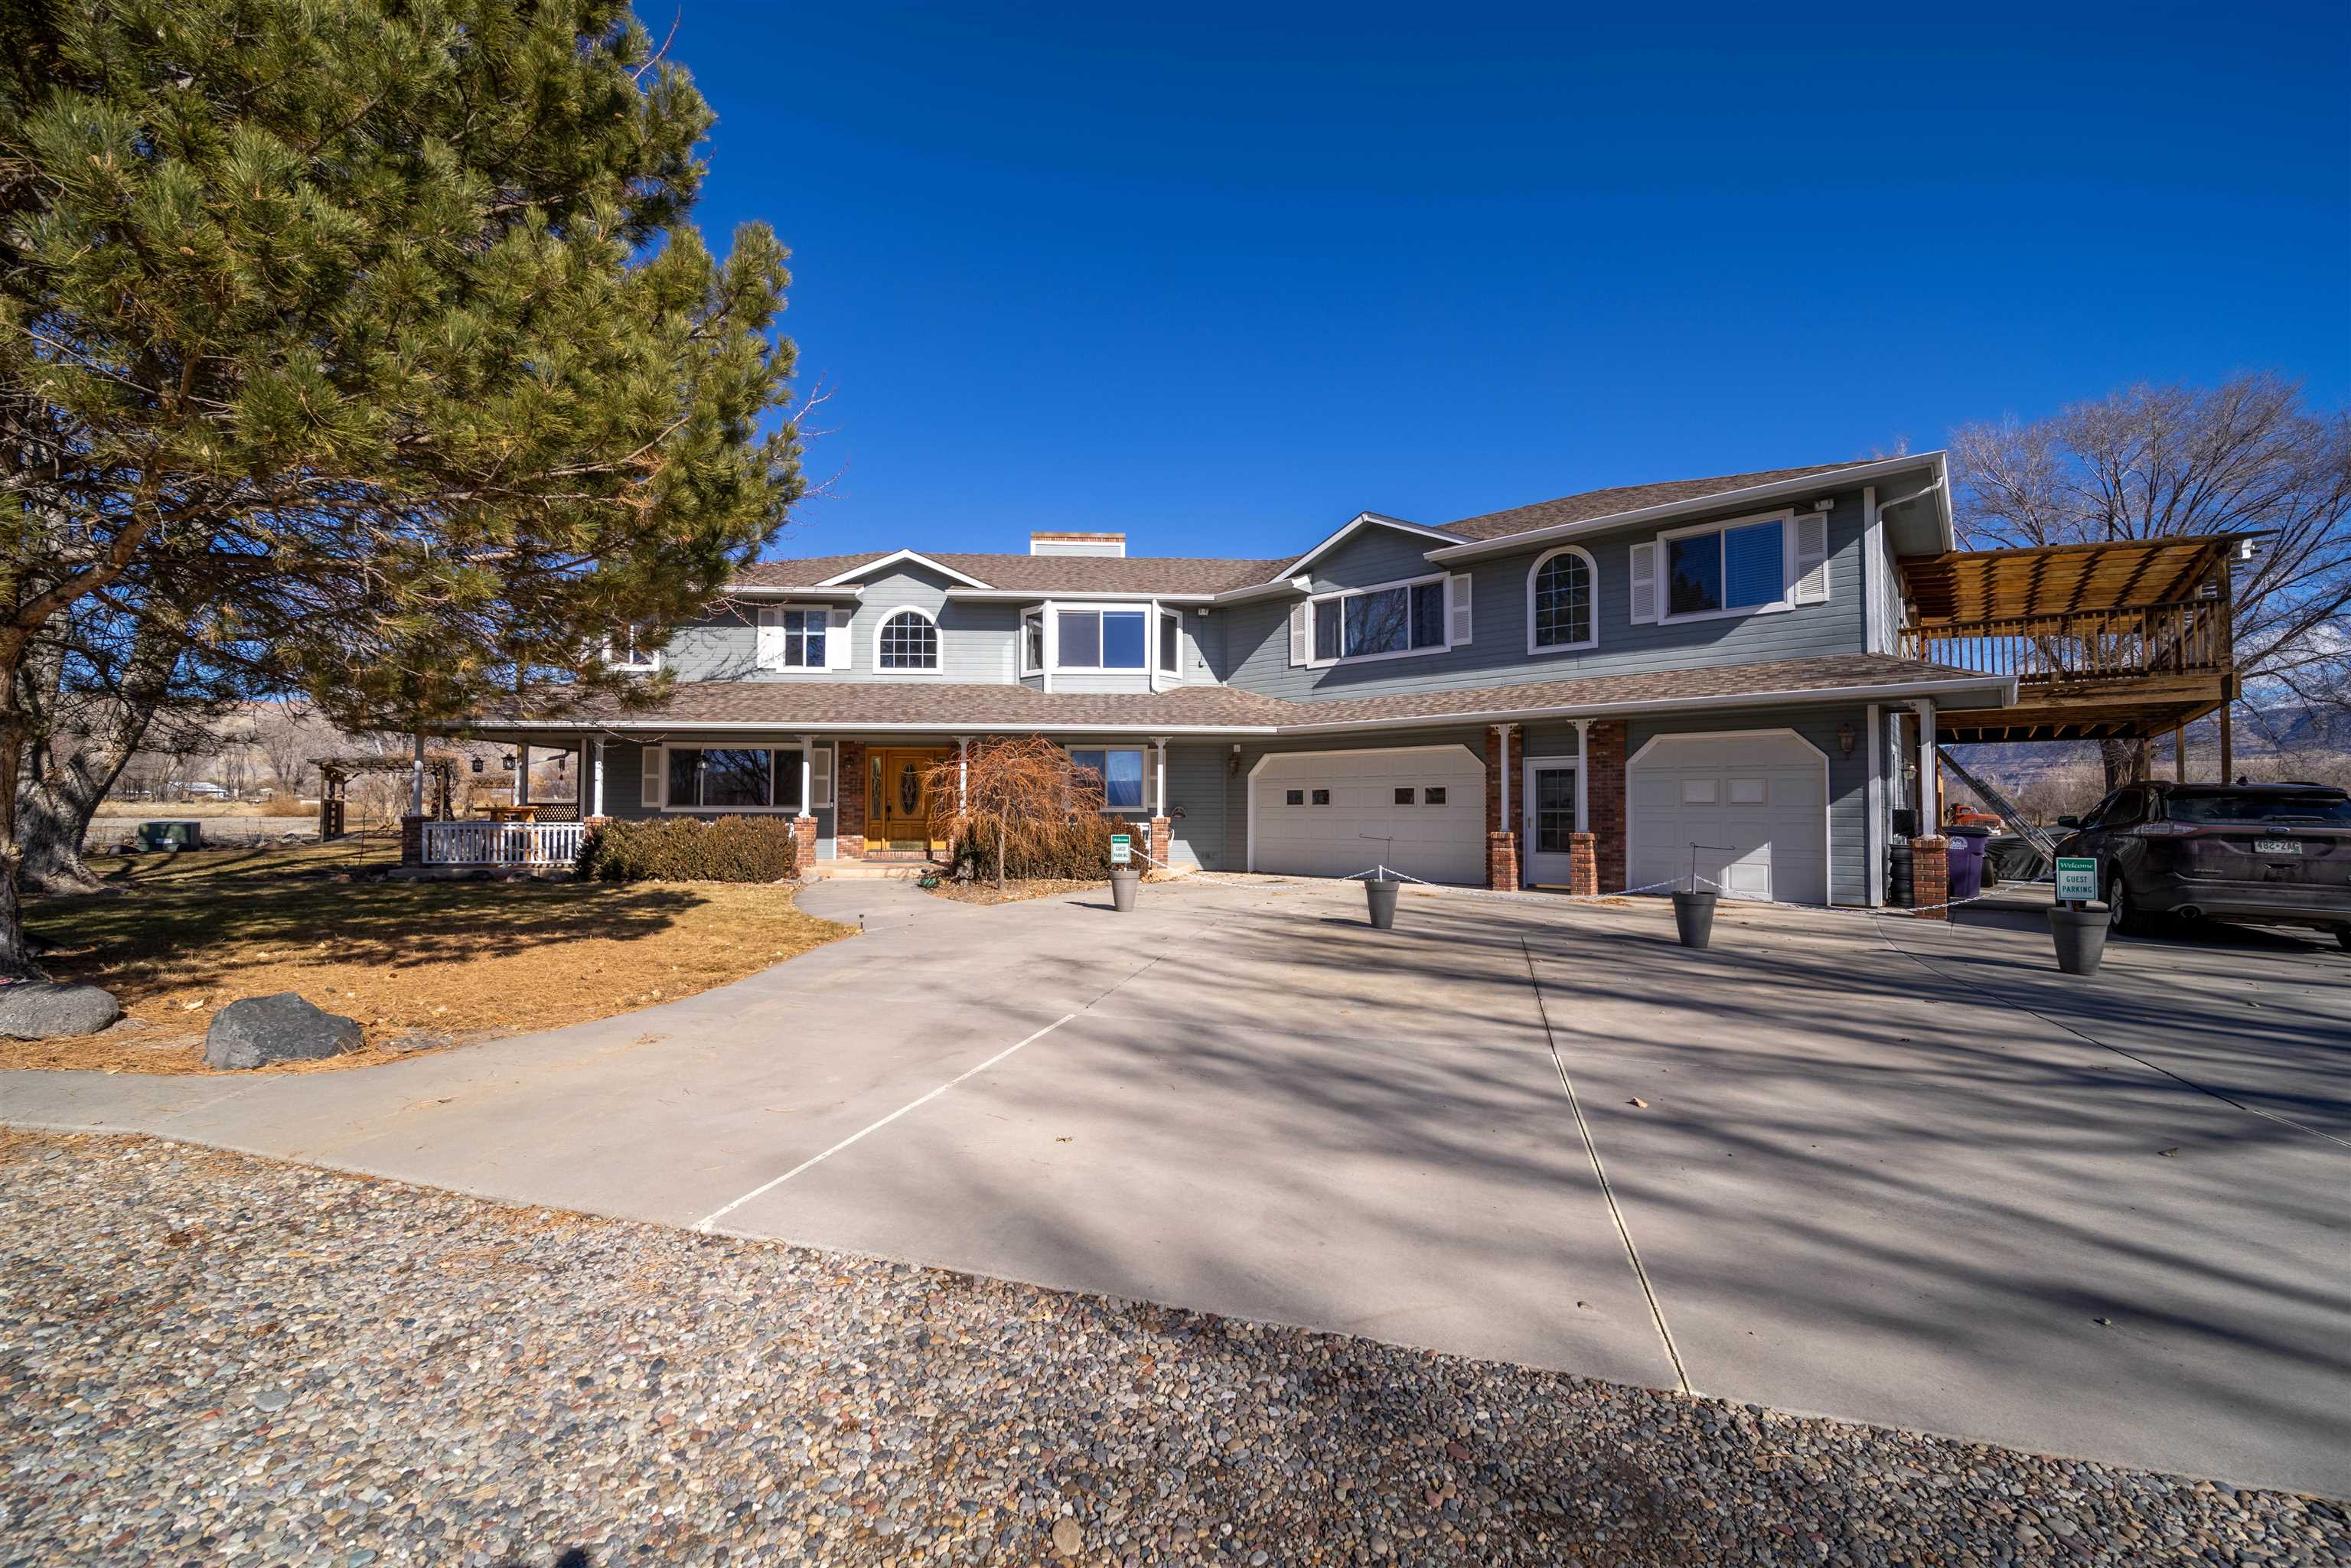 568 34 Road, Clifton, CO 